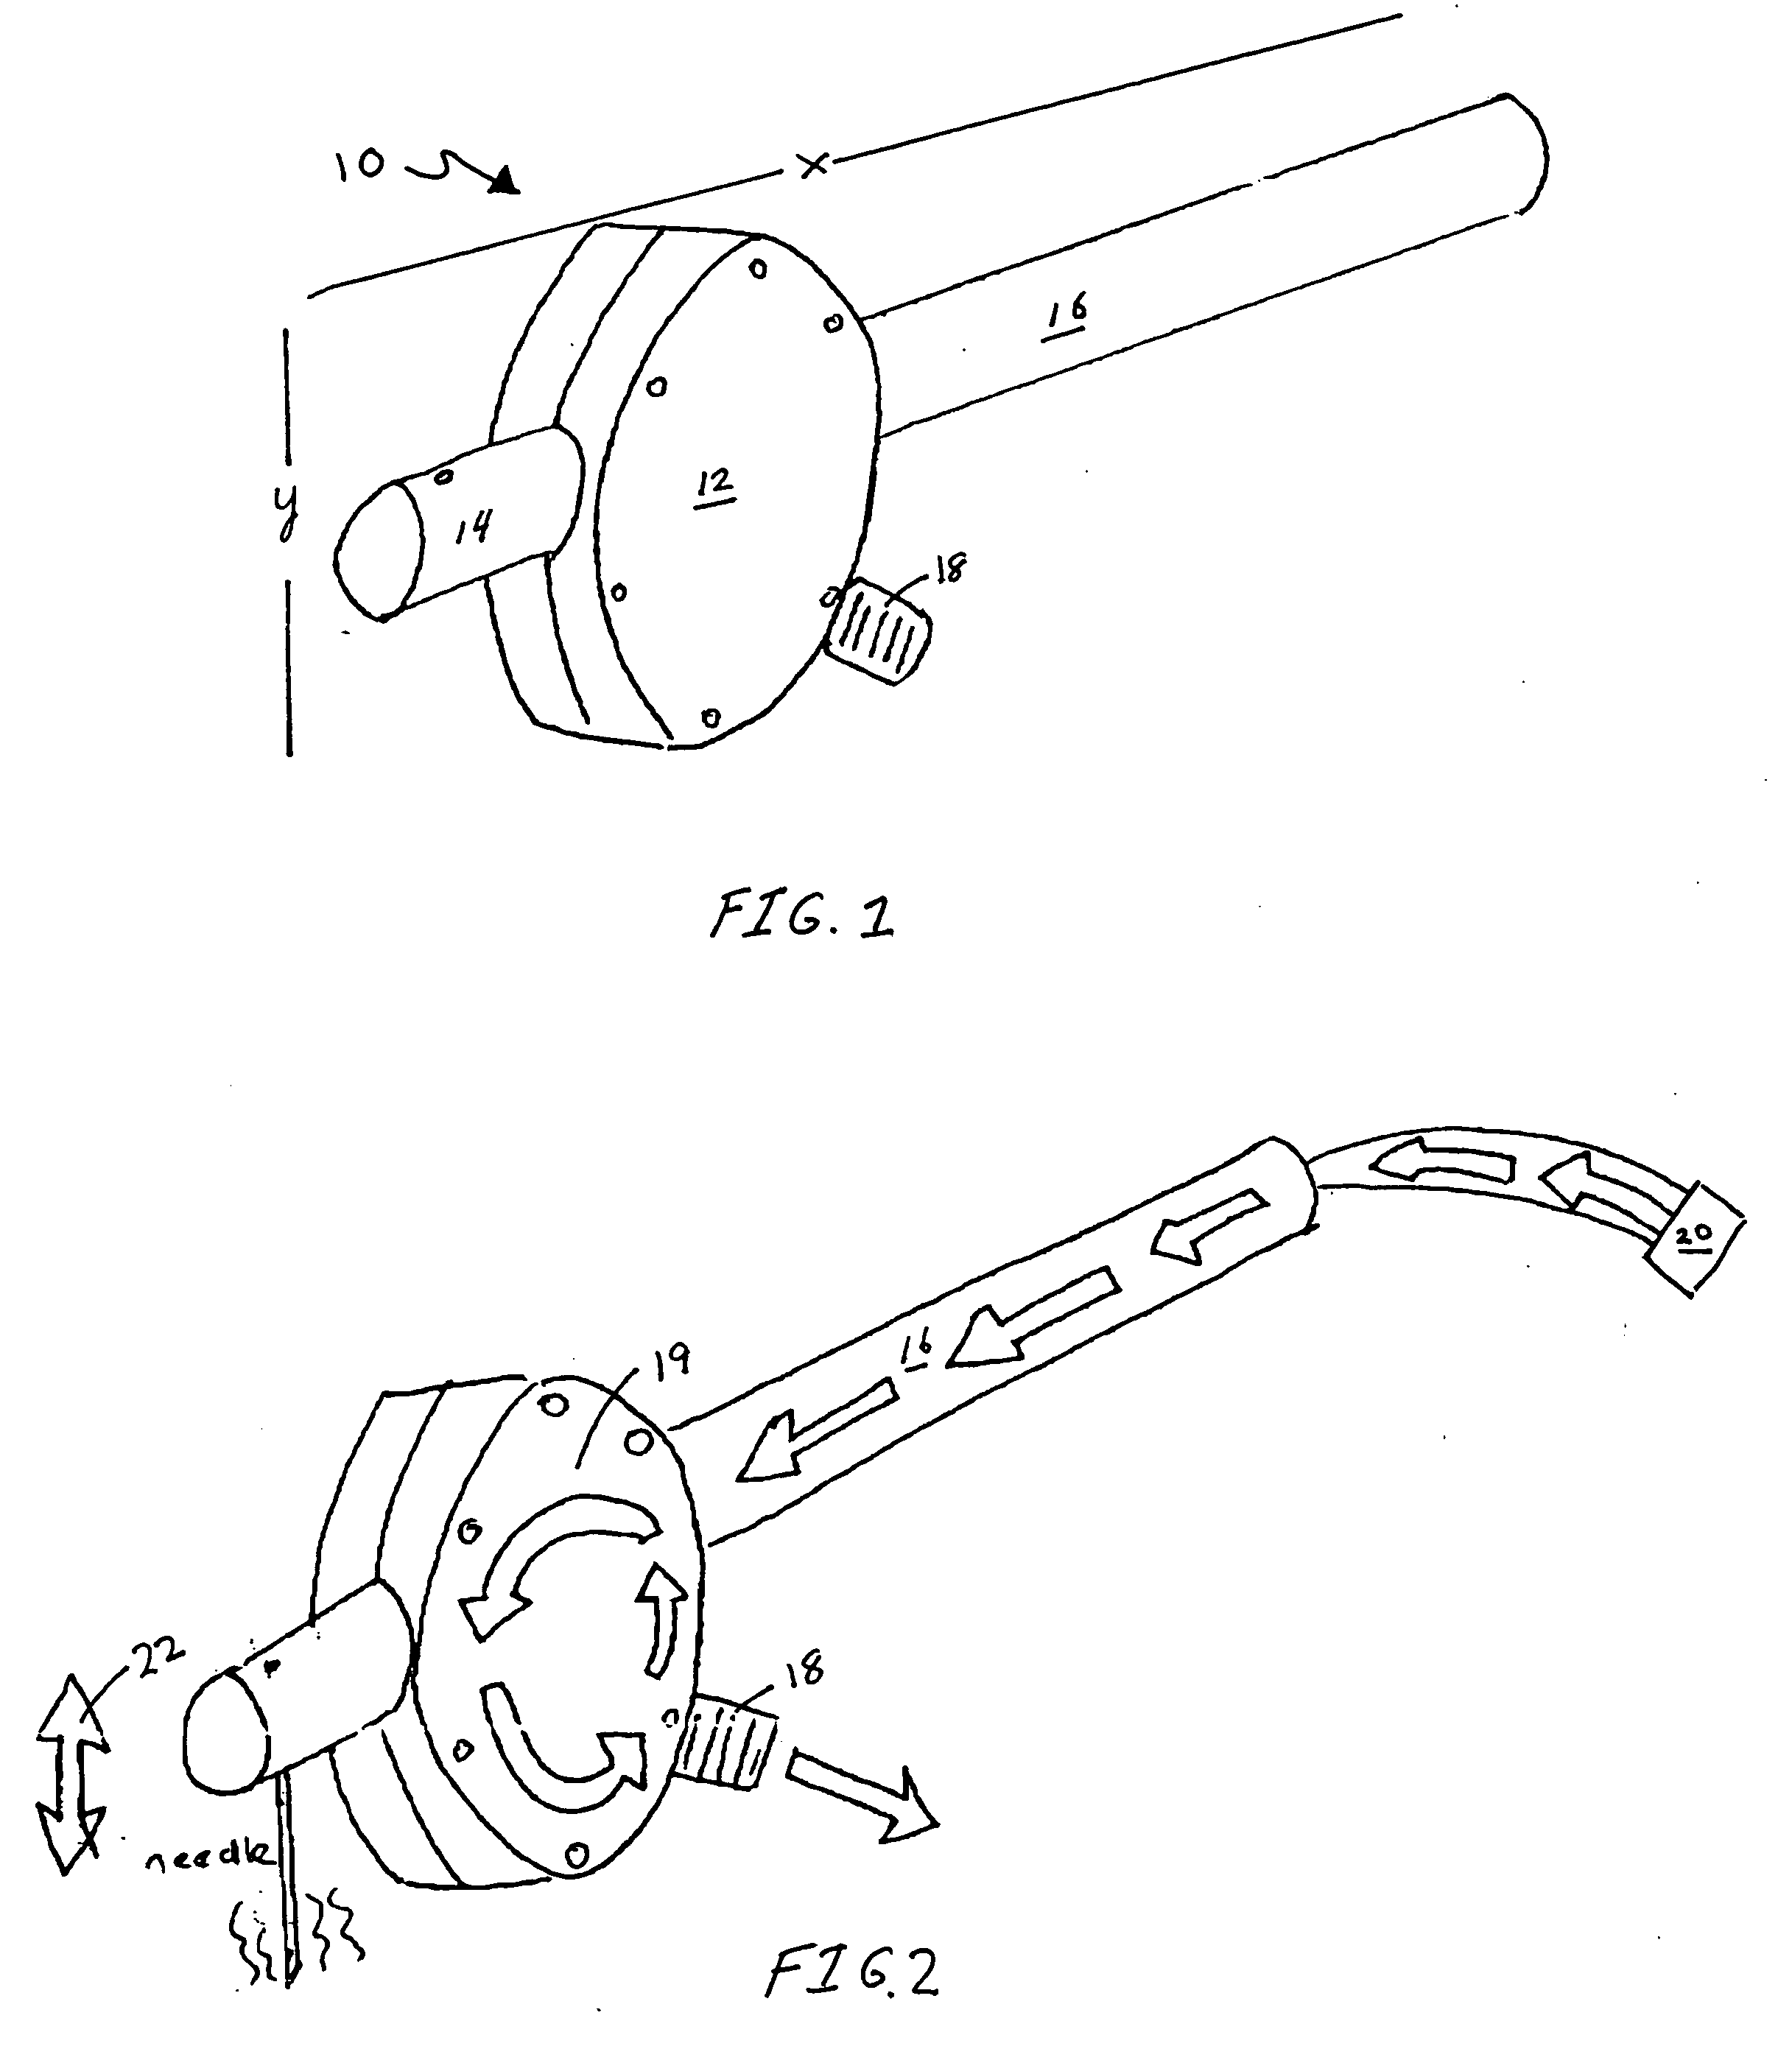 Methods and devices for delivering orthopedic cements to a target bone site